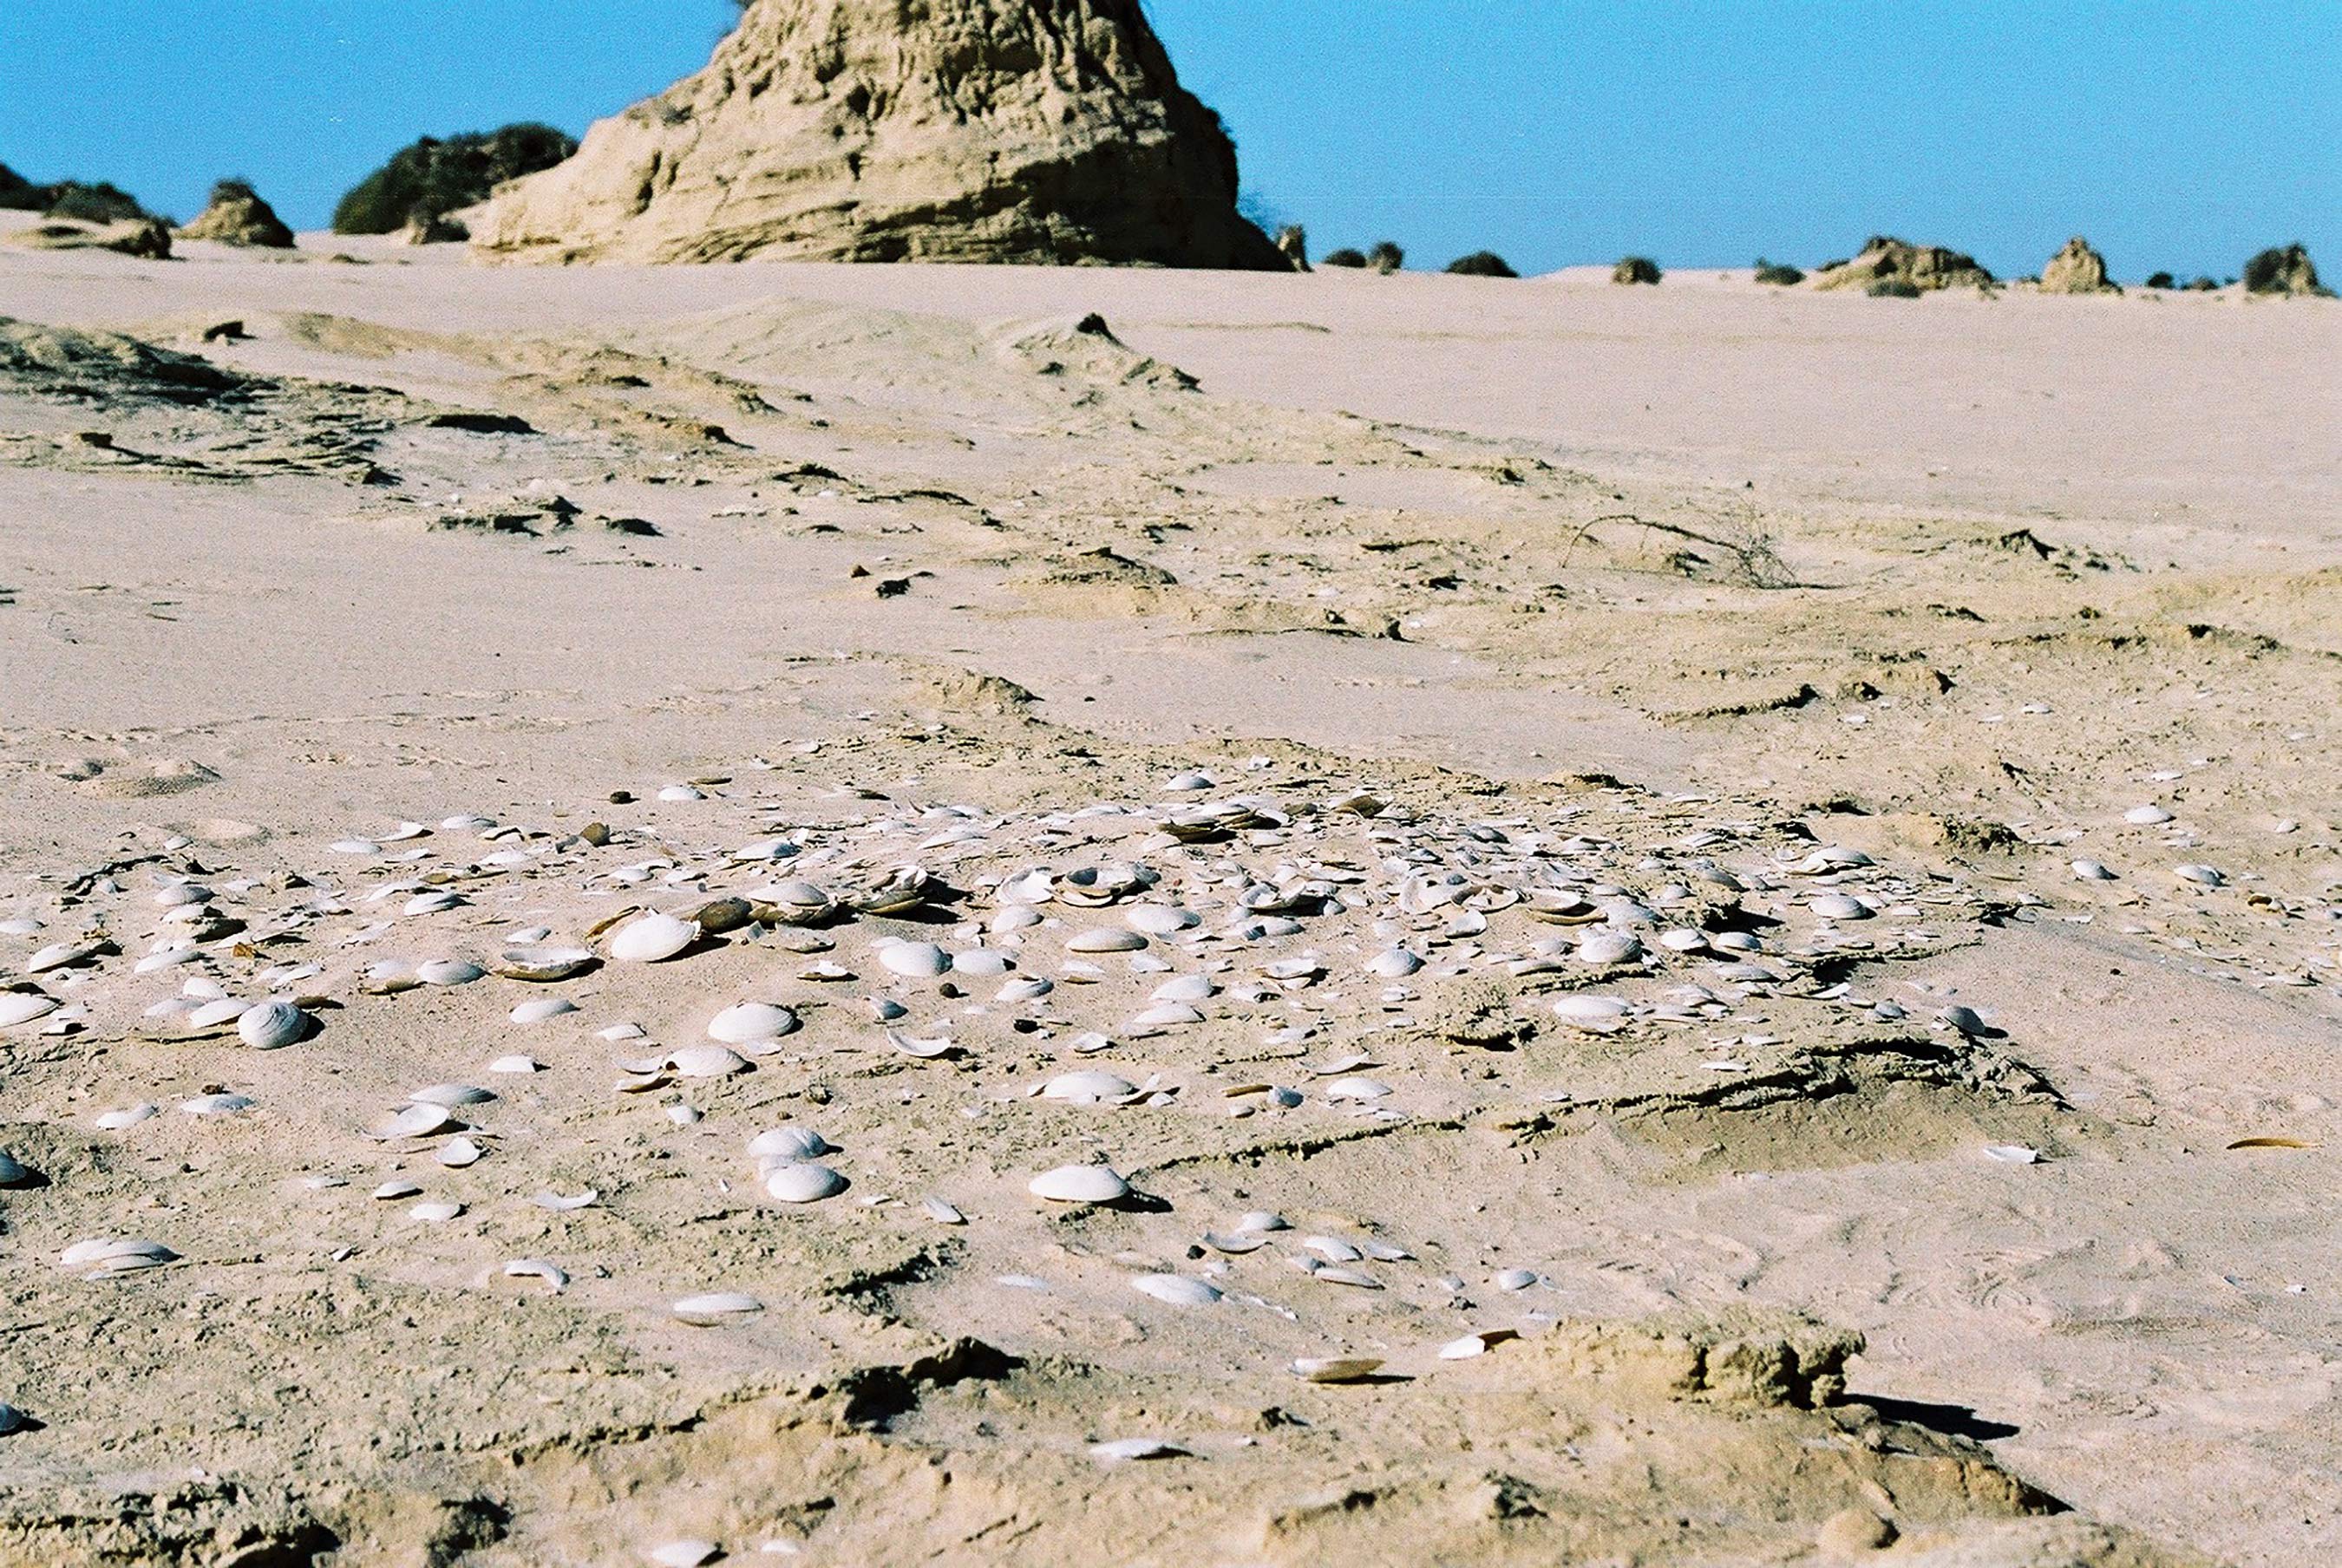 An ancient midden of freshwater mussel shells at Lake Mungo